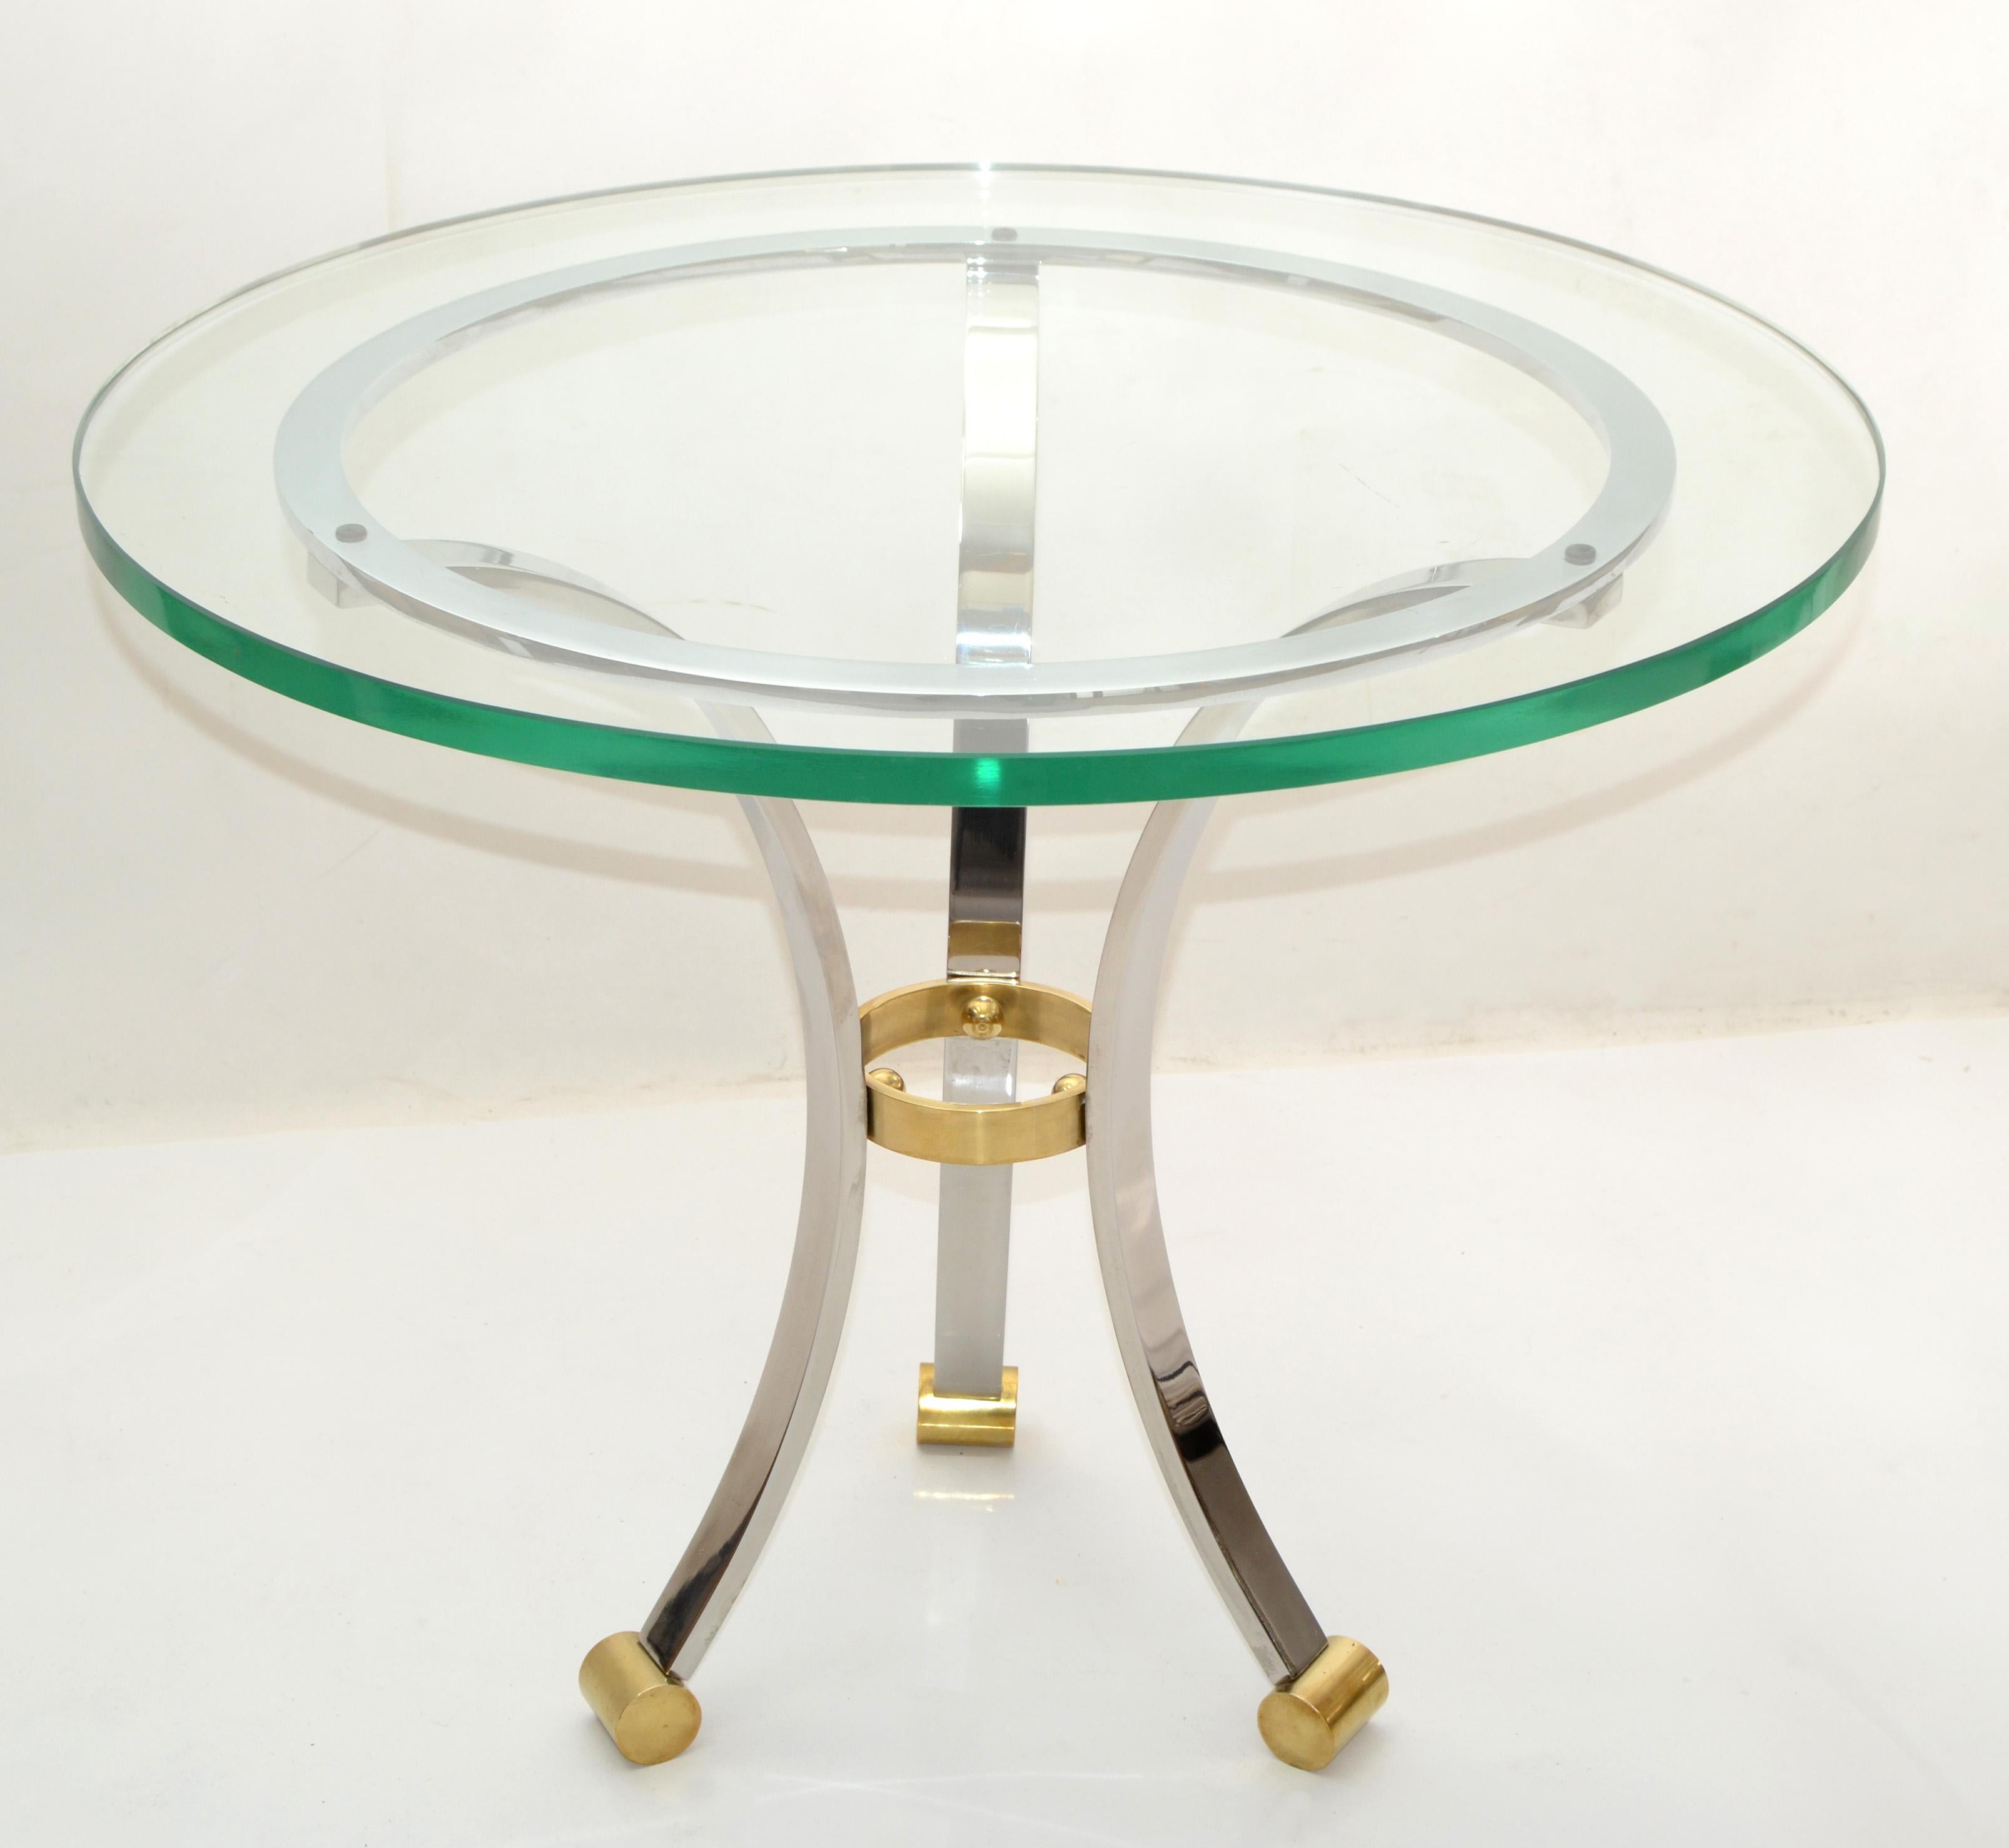 French Maison Jansen Round Glass, Brass & Steel Coffee Table Neoclassical, 1960s In Good Condition For Sale In Miami, FL